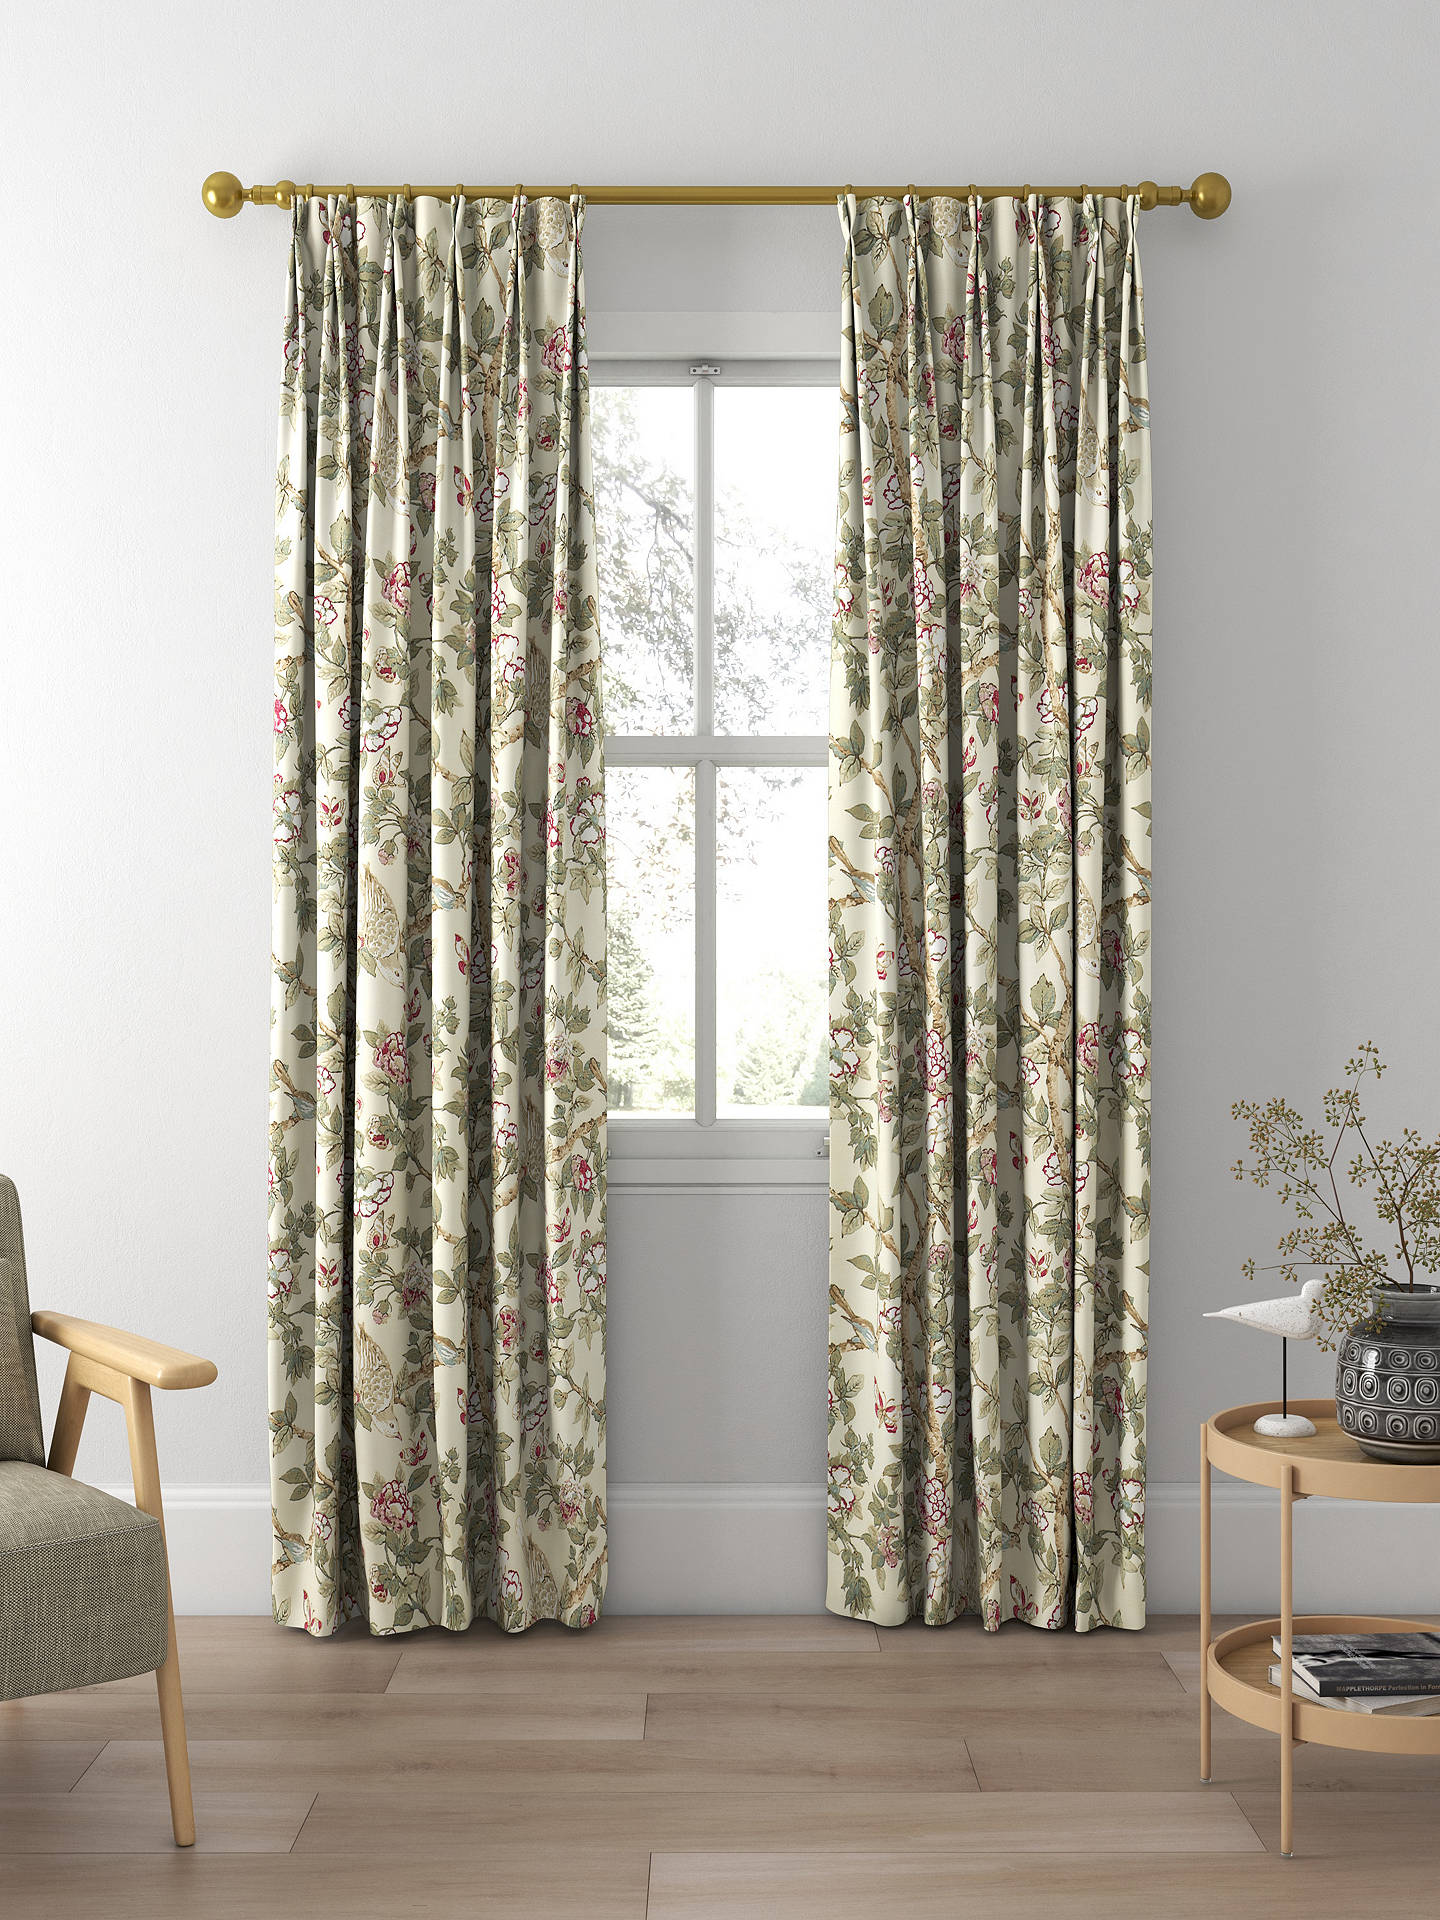 Sanderson Caverley Rose Made to Measure Curtains, Rose/Pewter